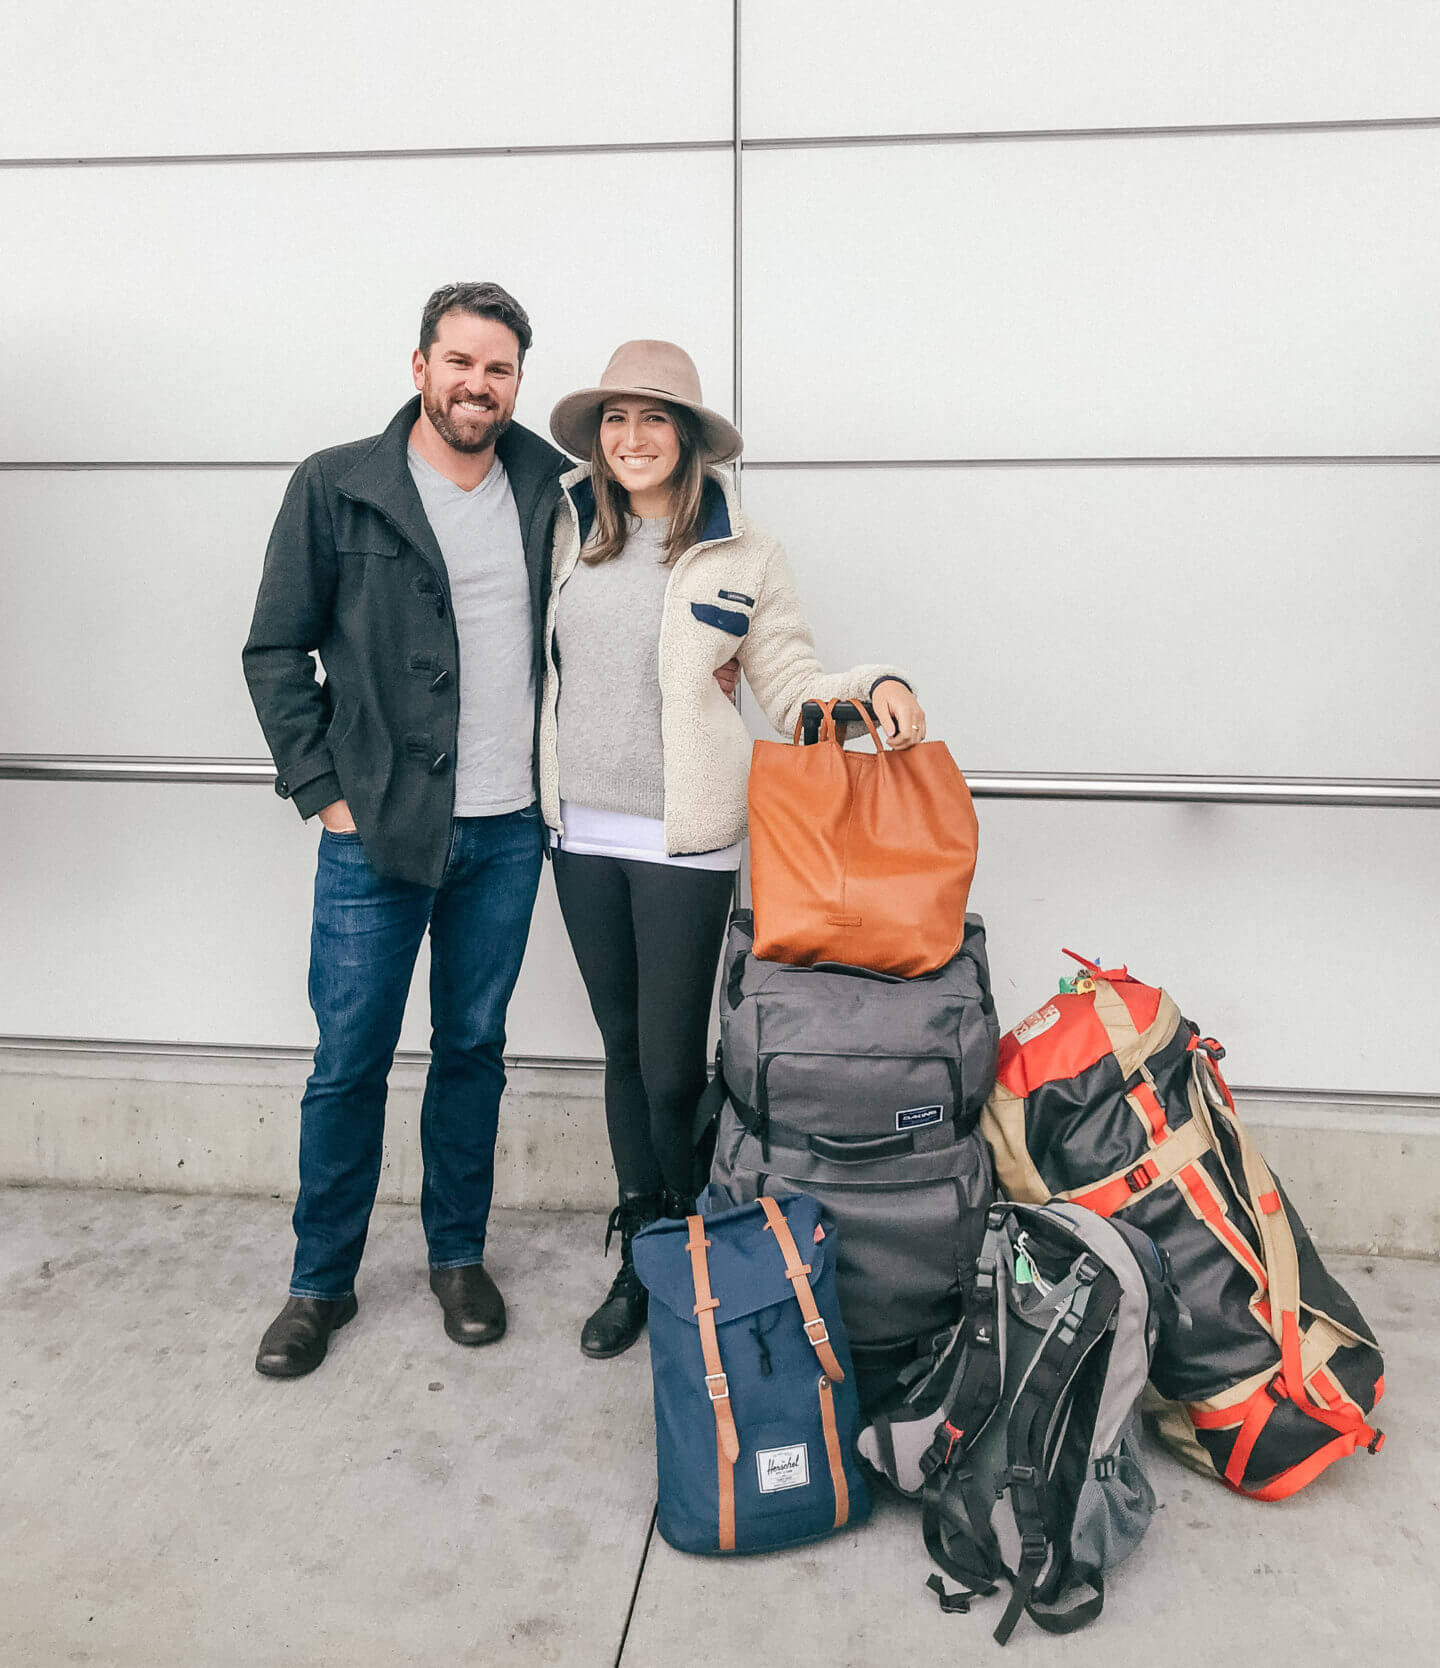 Why I Quit my Dream Job to Travel - A couple smiles at the airport with their luggage before heading off on a two year trip around the world! - the Best Travel Planning Resources & Travel Gear I Swear By